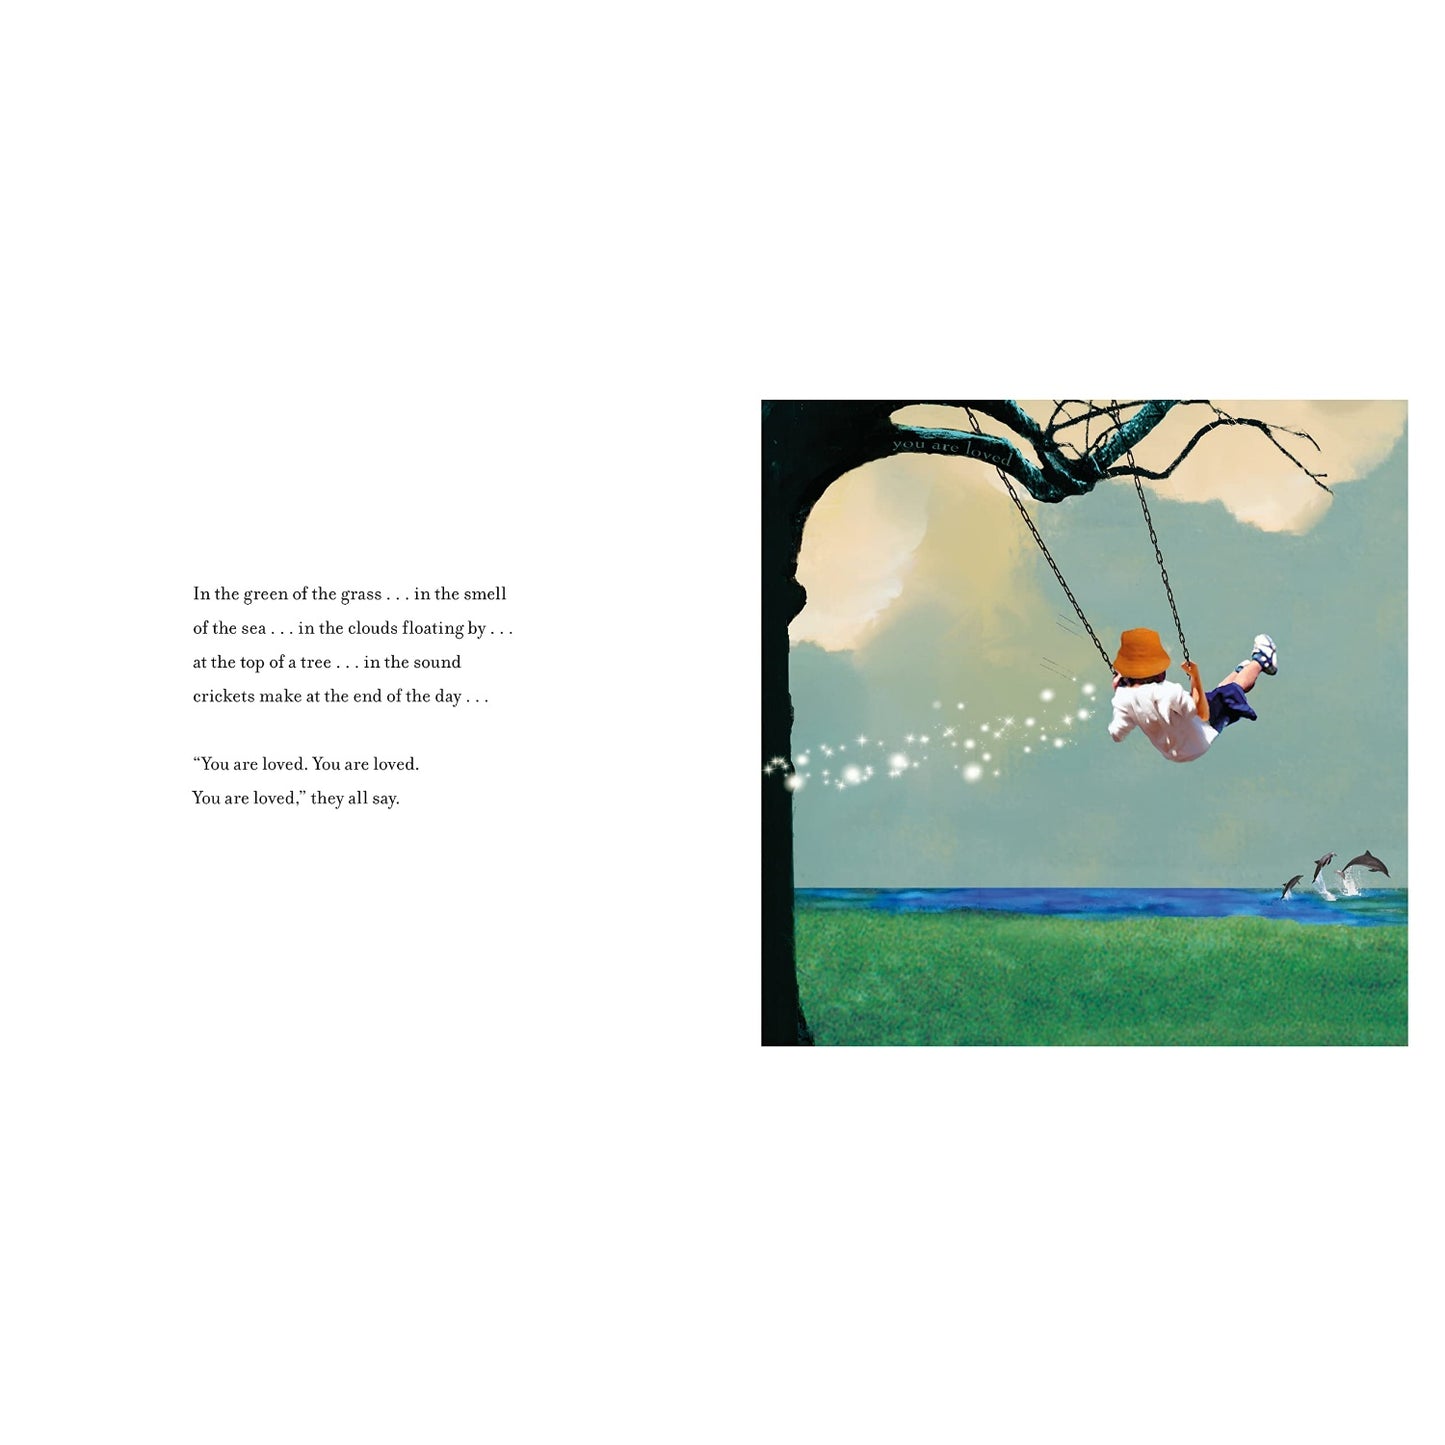 Wherever You Are My Love Will Find You | Children’s Board Book